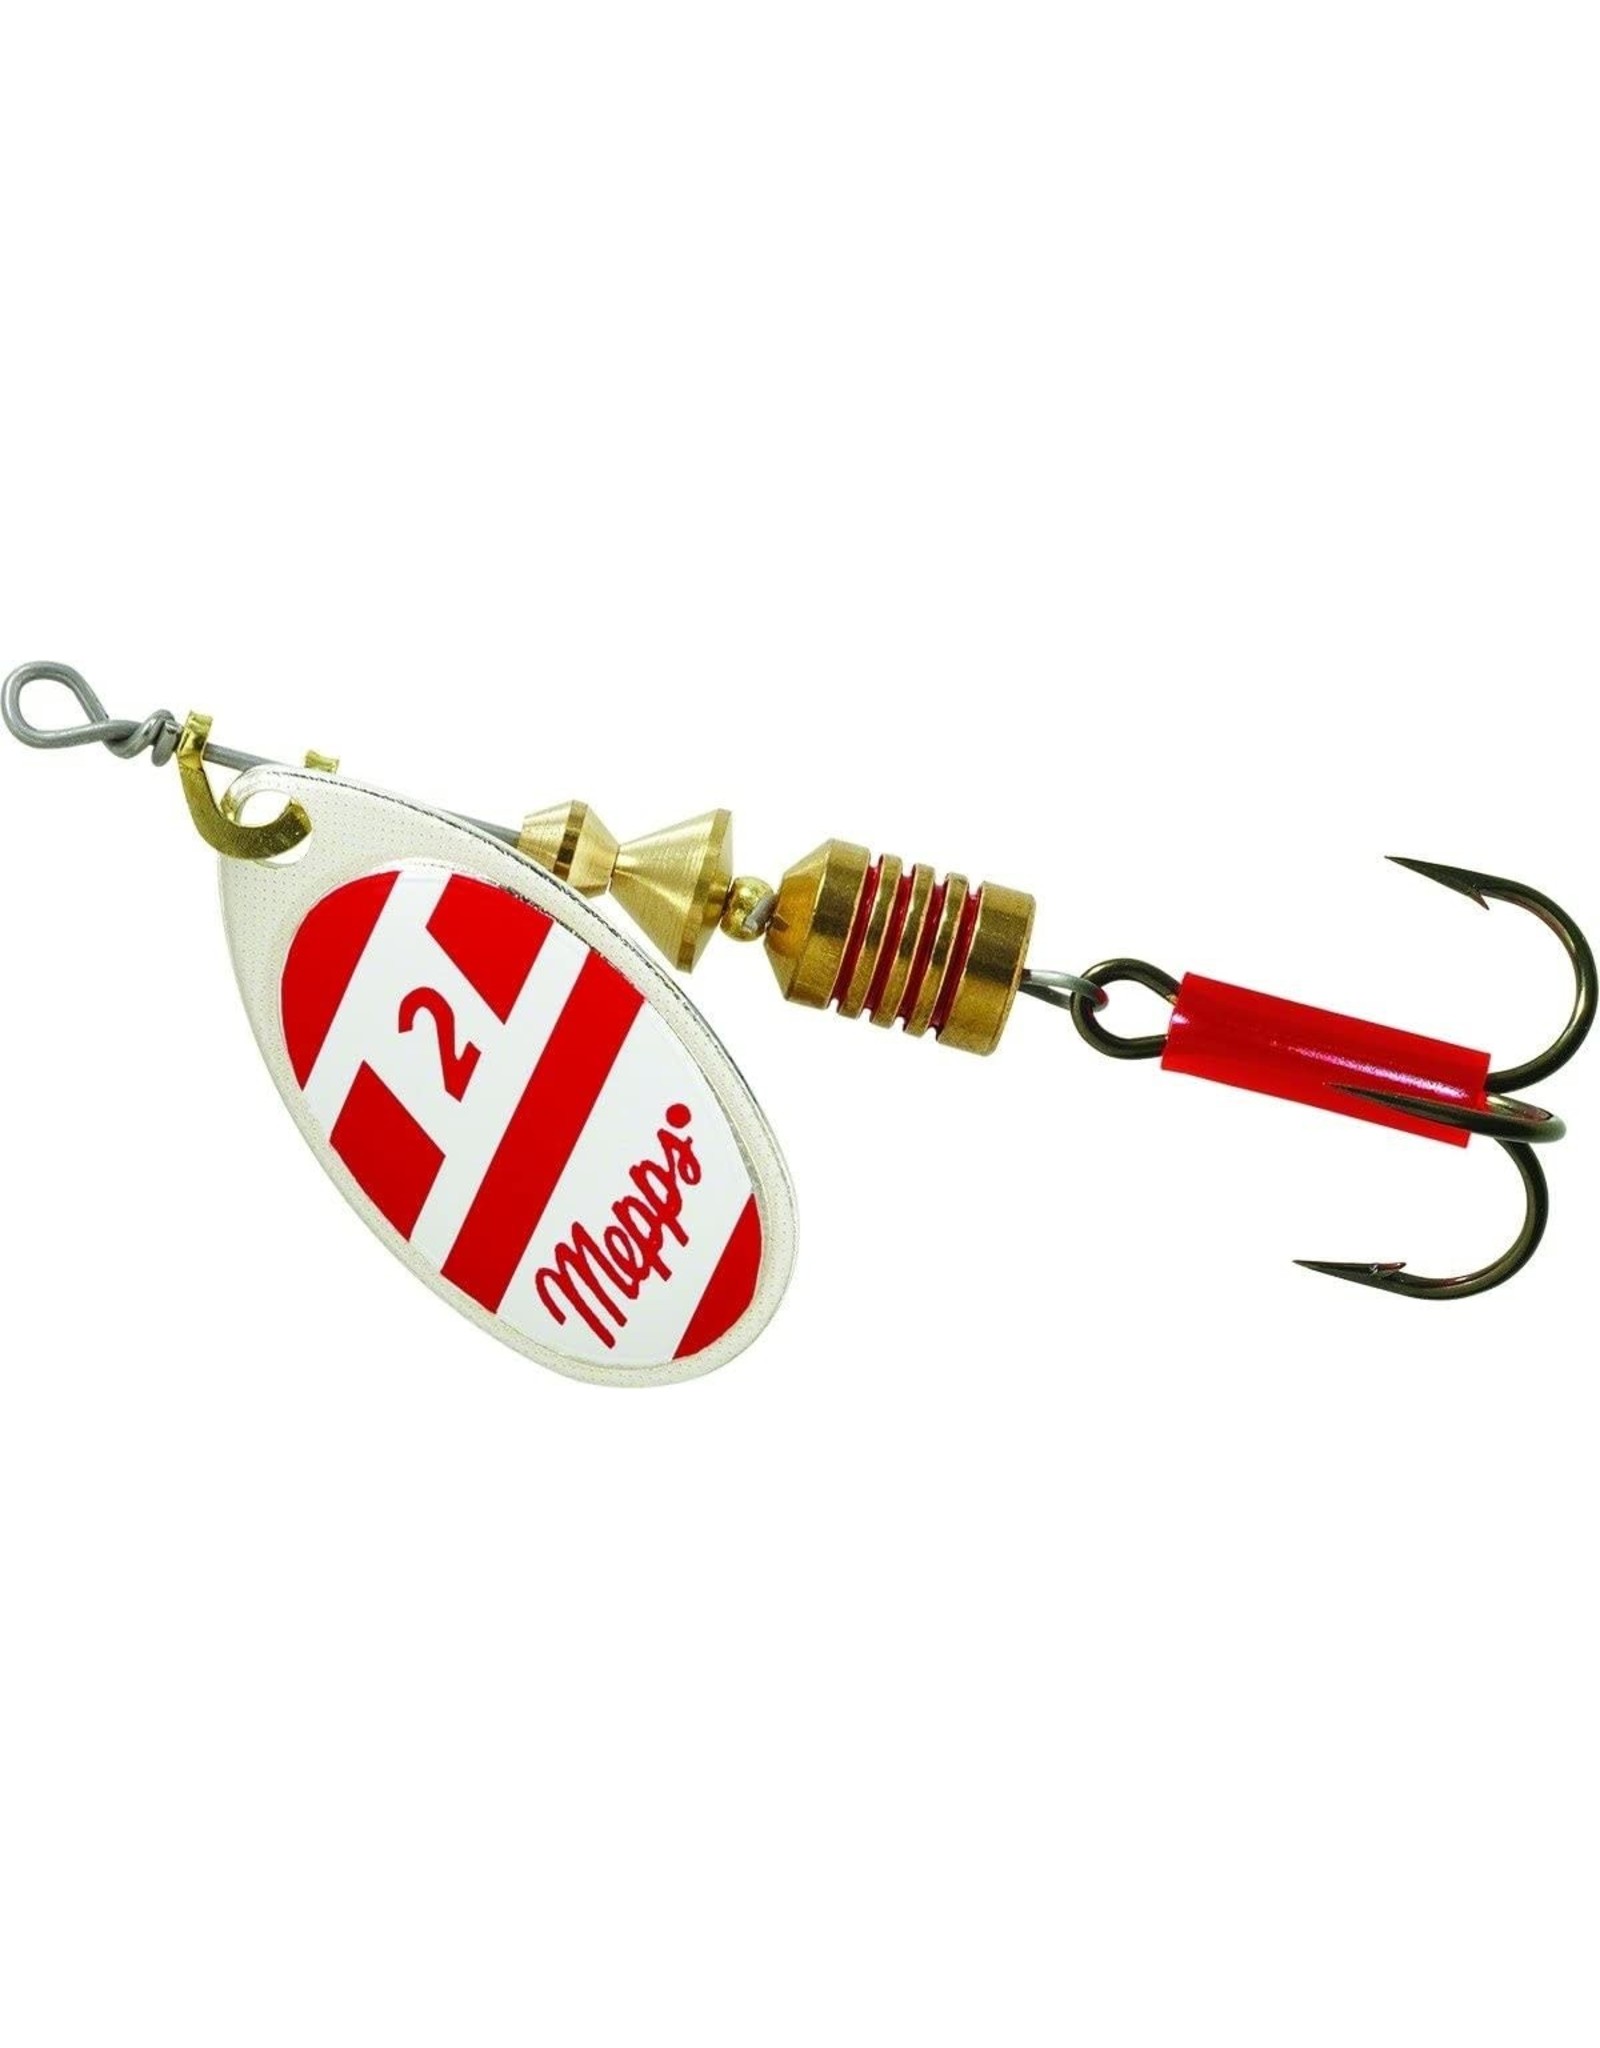 Mepps Mepps Aglia 1/6 Oz. #2 Spinner - Silver, Red, and White Blade